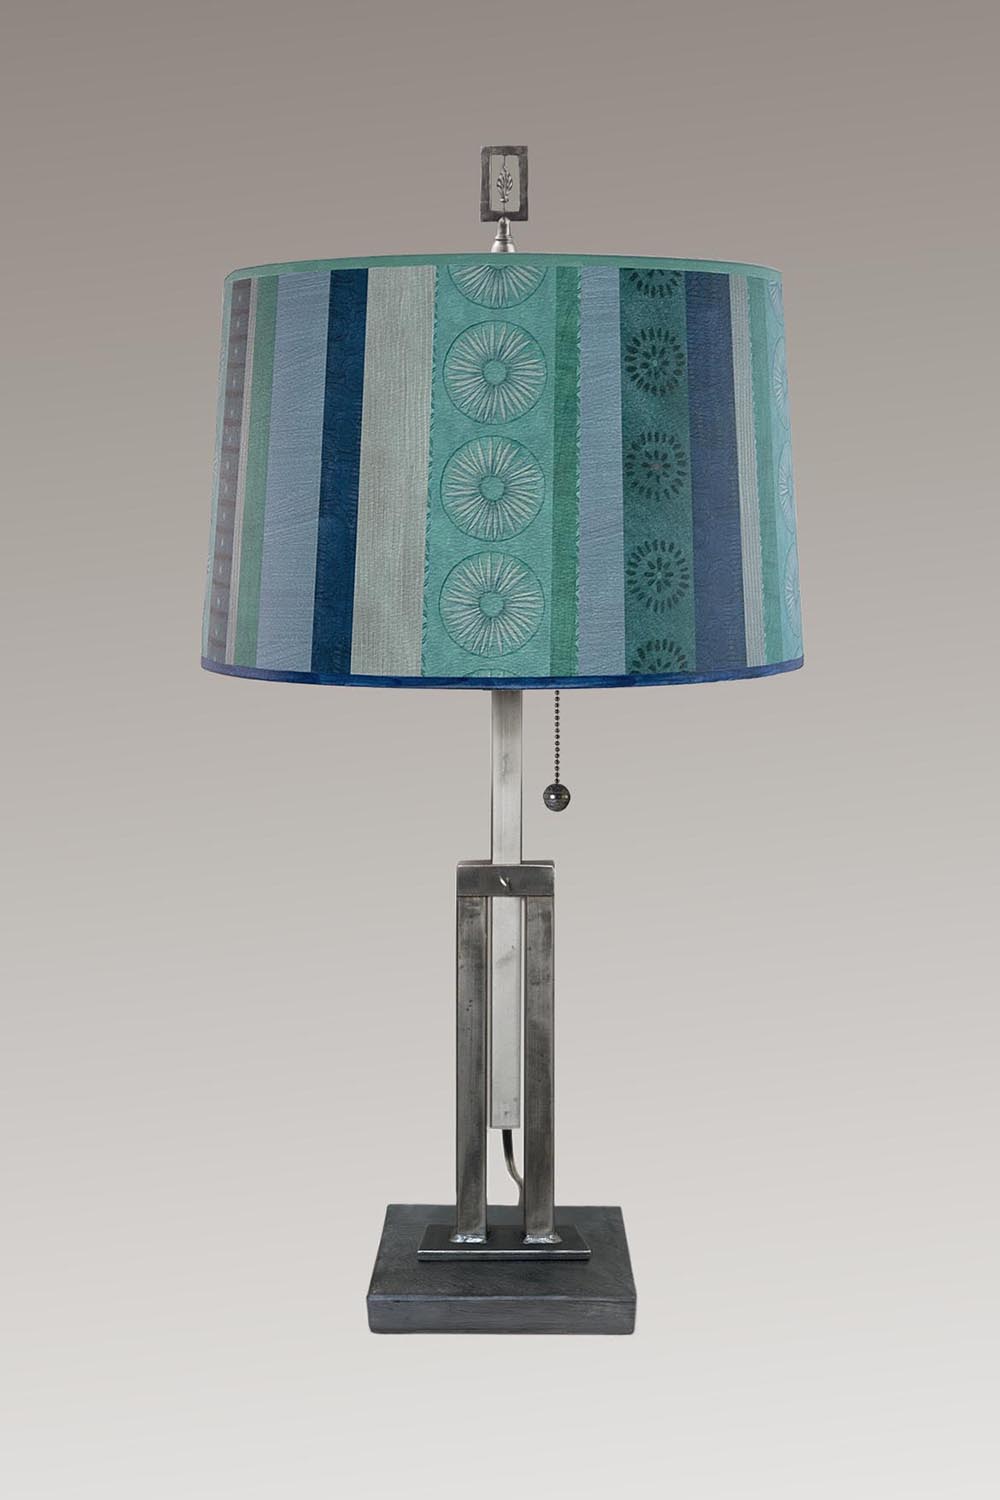 Janna Ugone & Co Table Lamps Adjustable-Height Steel Table Lamp with Large Drum Shade in Serape Waters